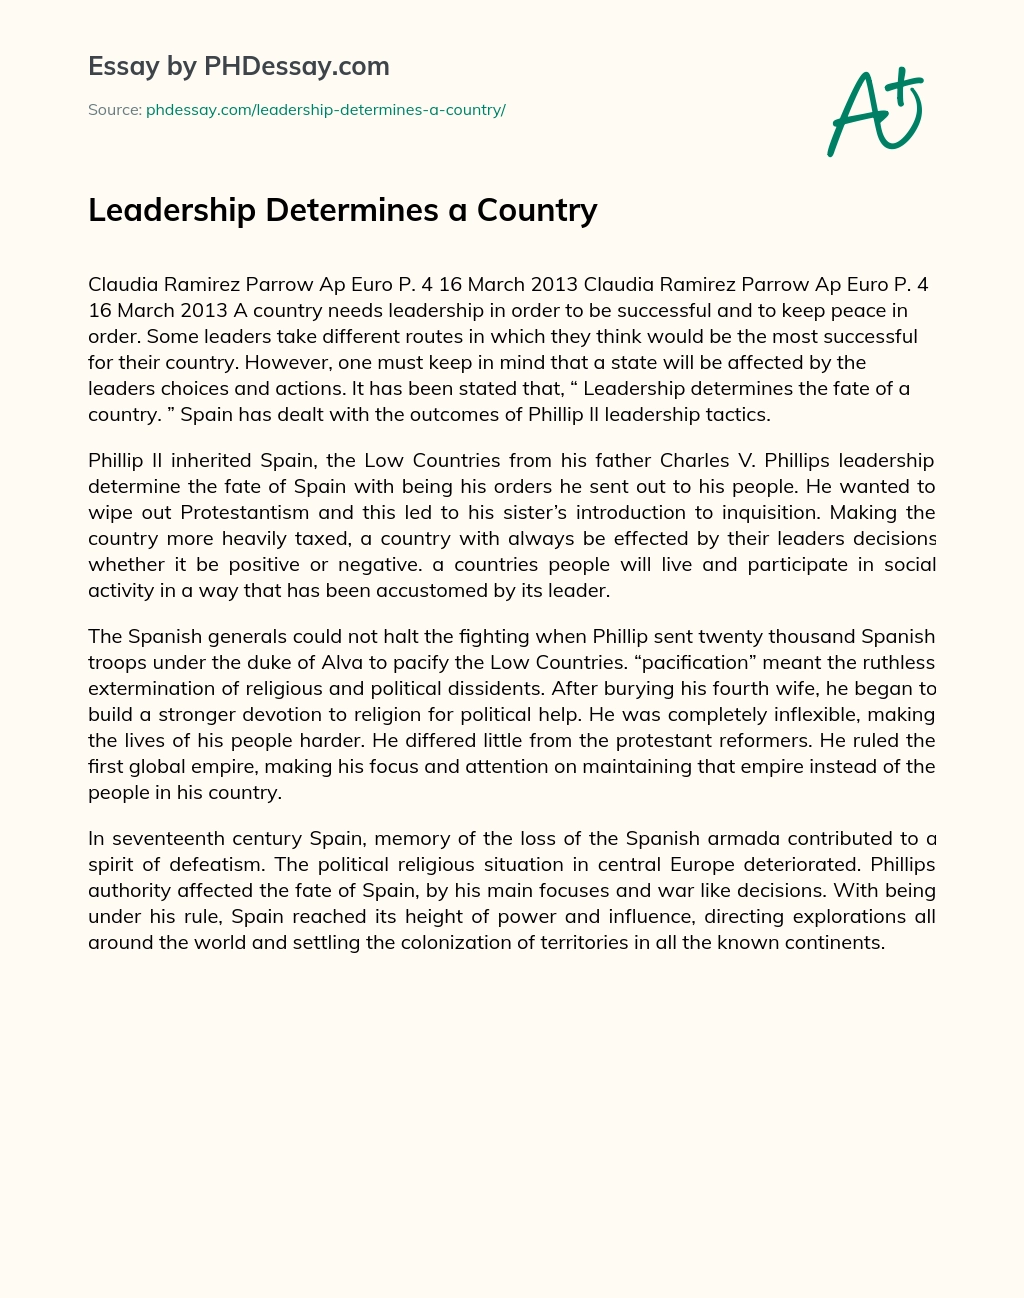 Leadership Determines a Country essay